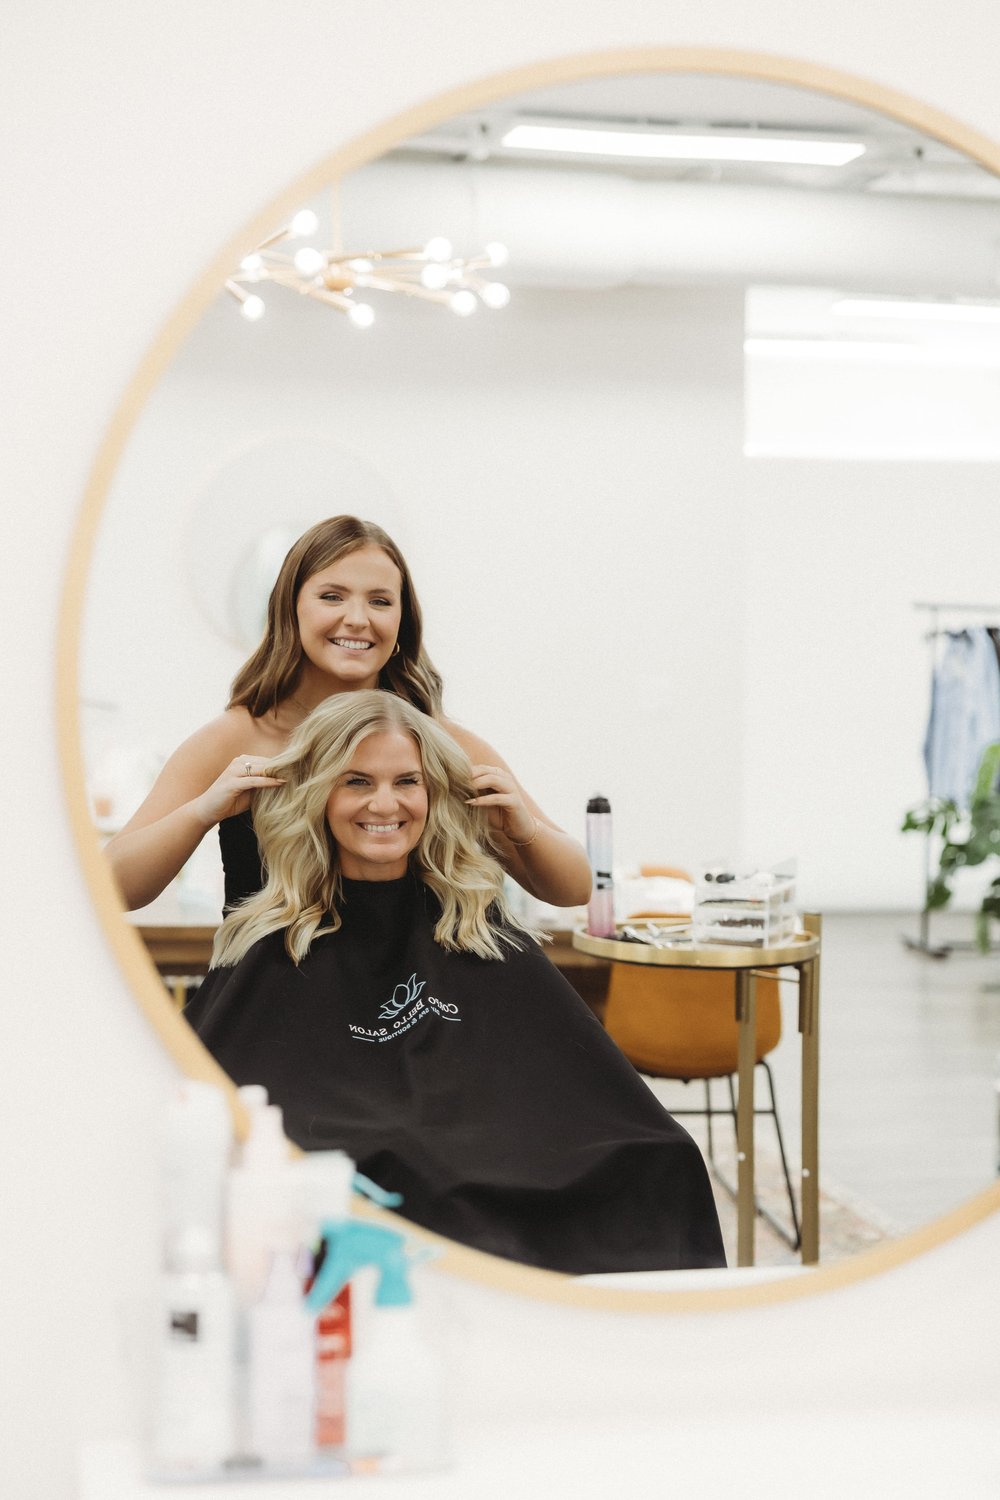  a hair stylist and her client smile together as she fluffs her hair during a stylist photoshoot 